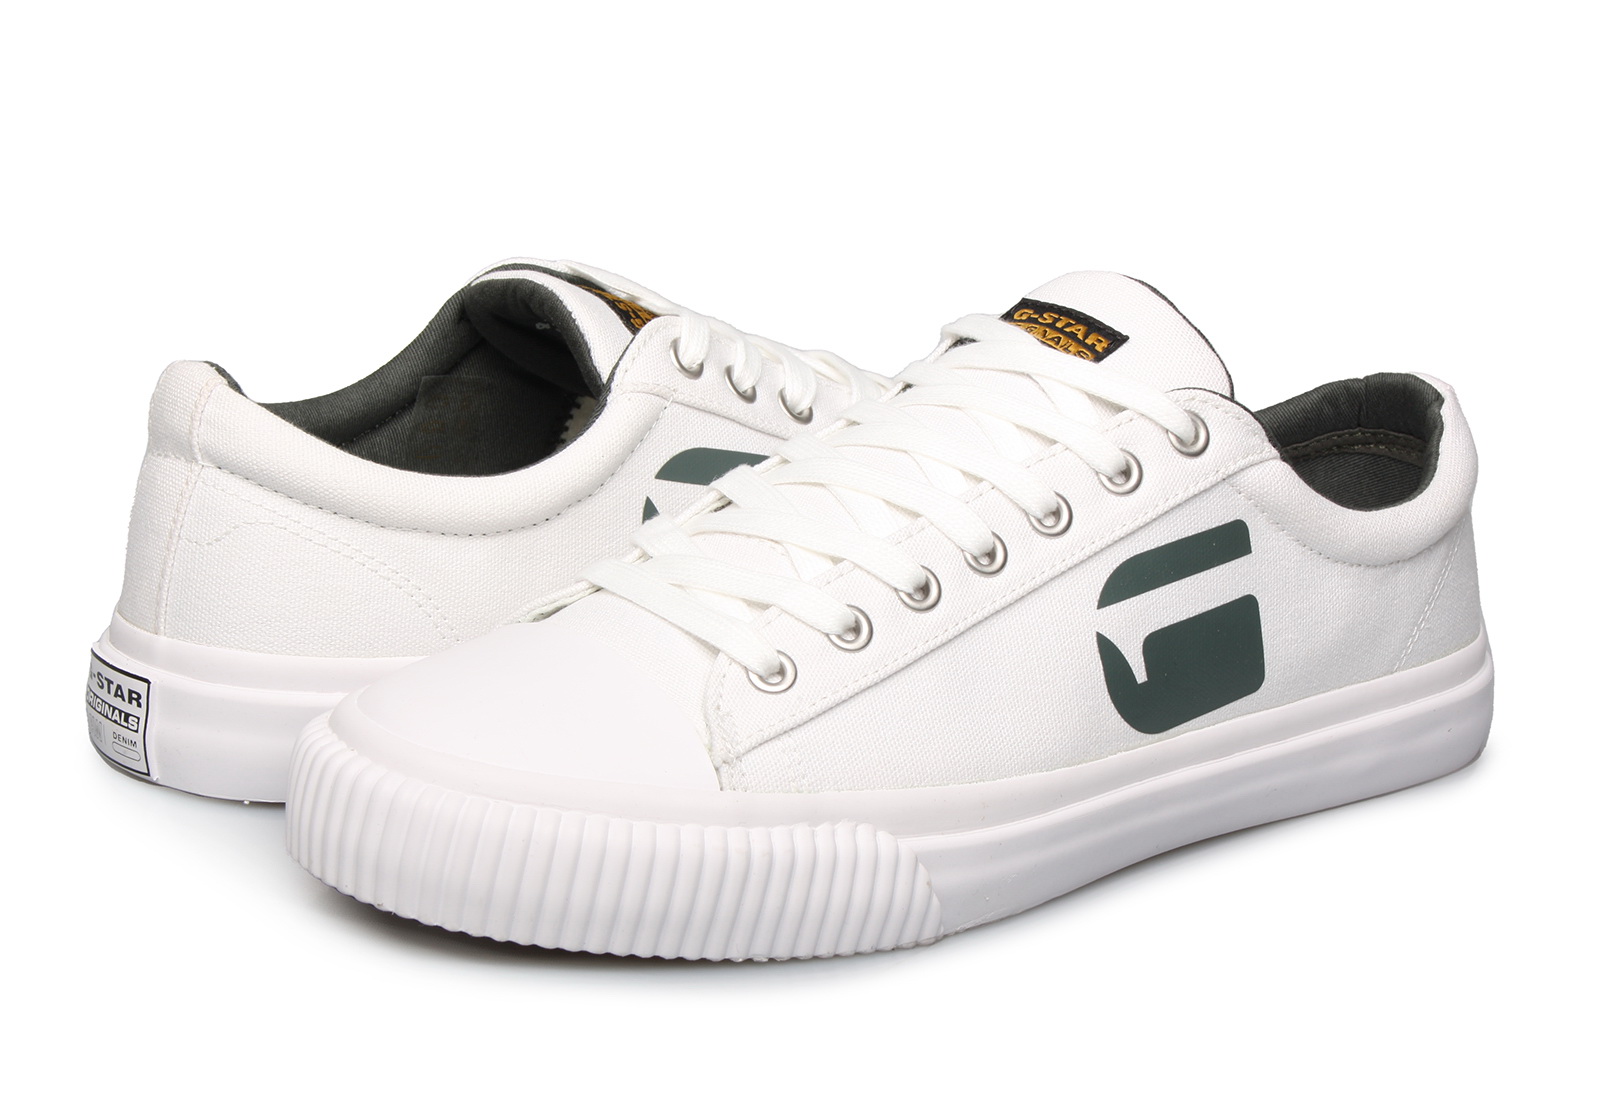 G-Star RAW Trainers - Cadet - 42-002509-1000 - Online shop for